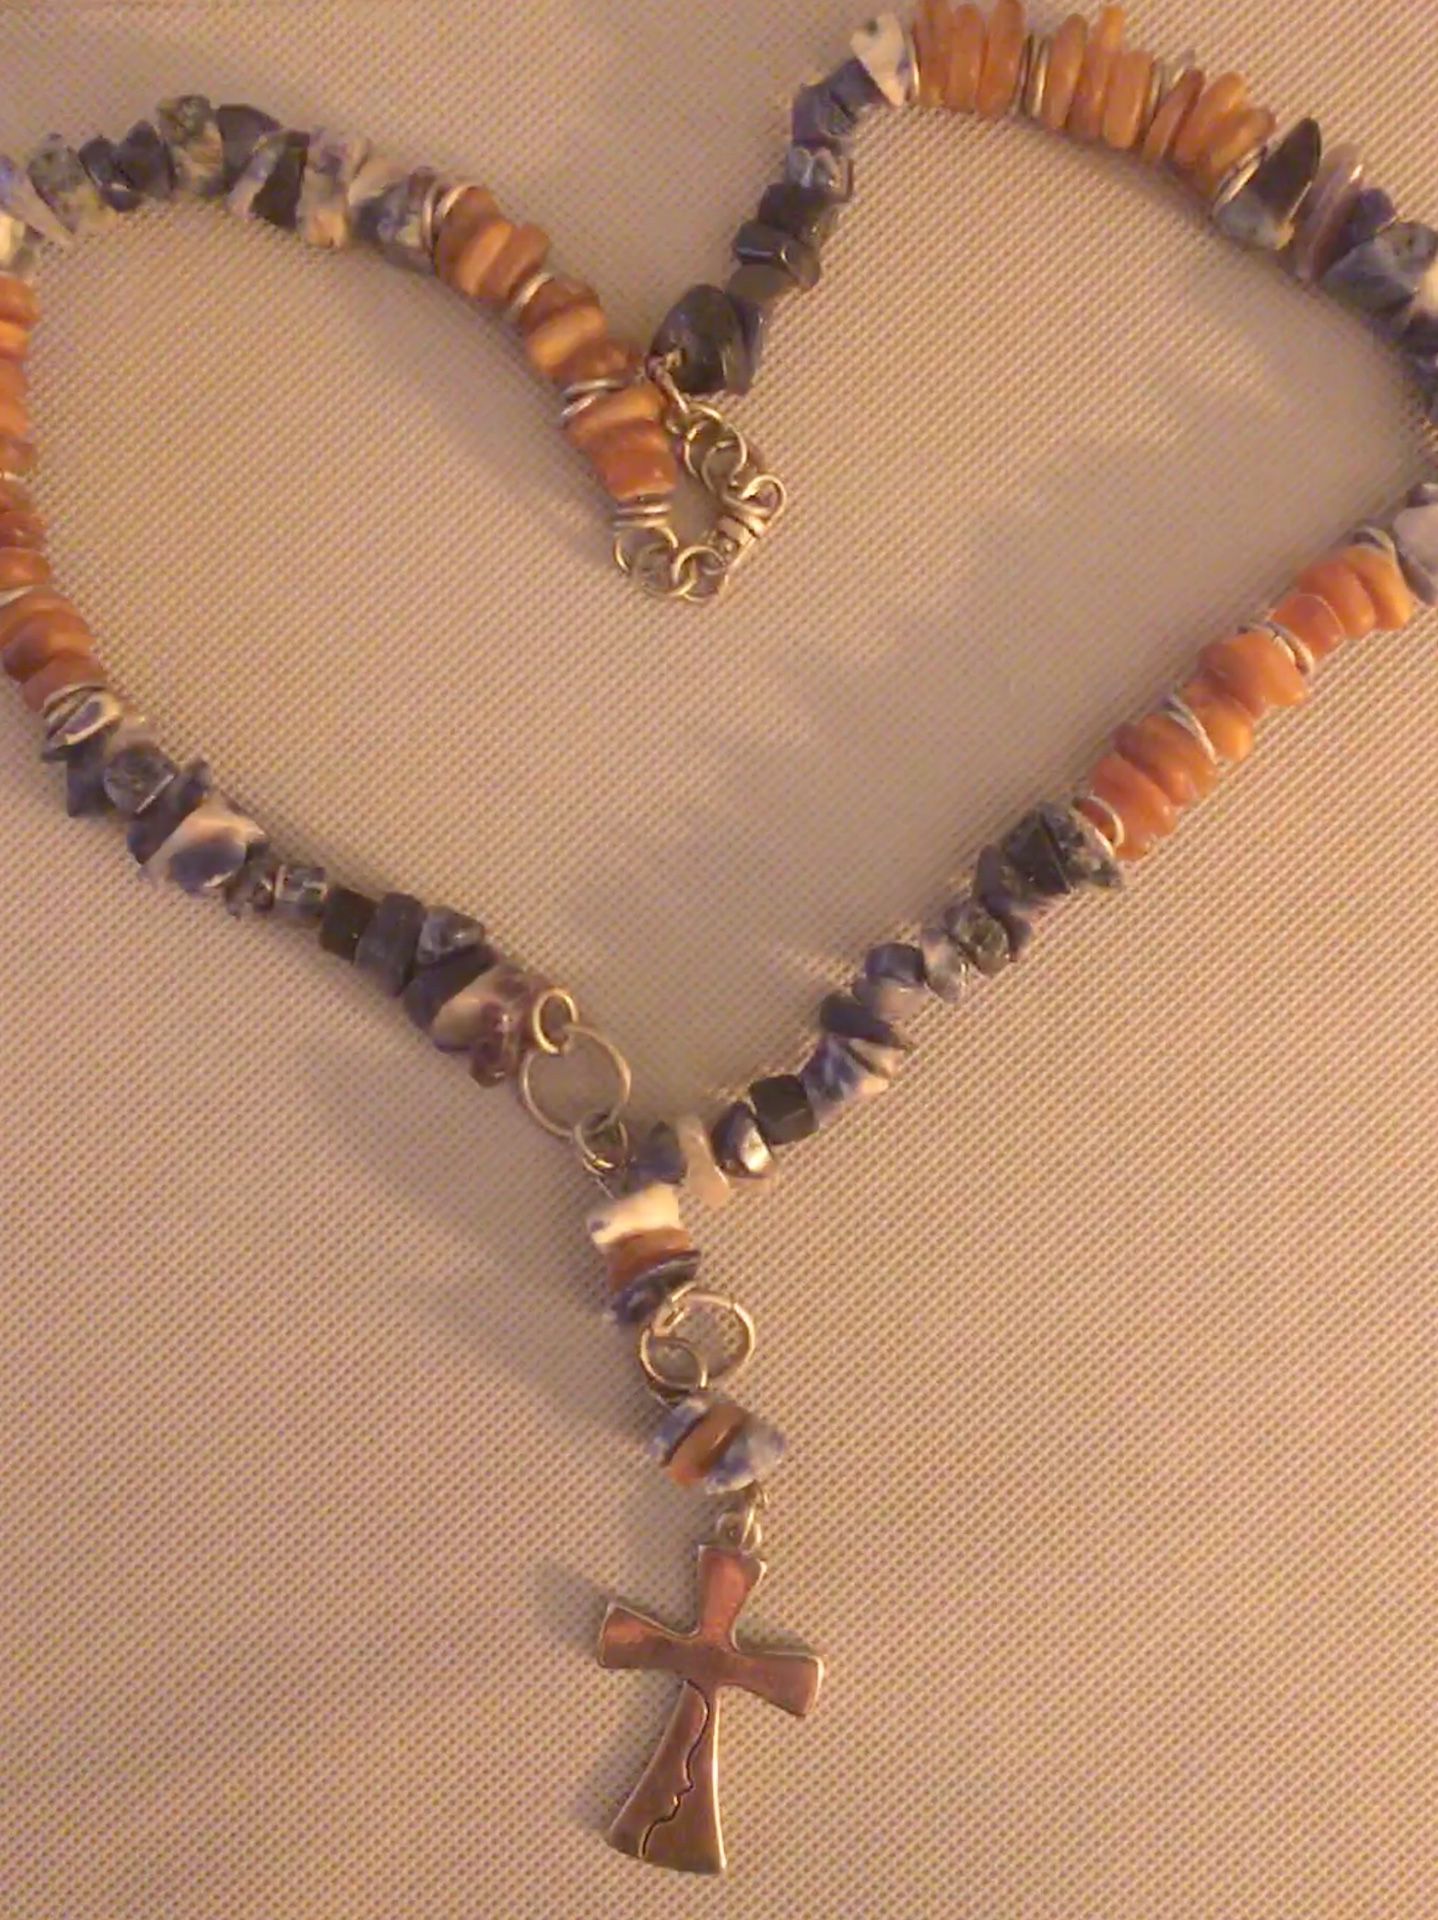 Beautiful necklace (natural stones)